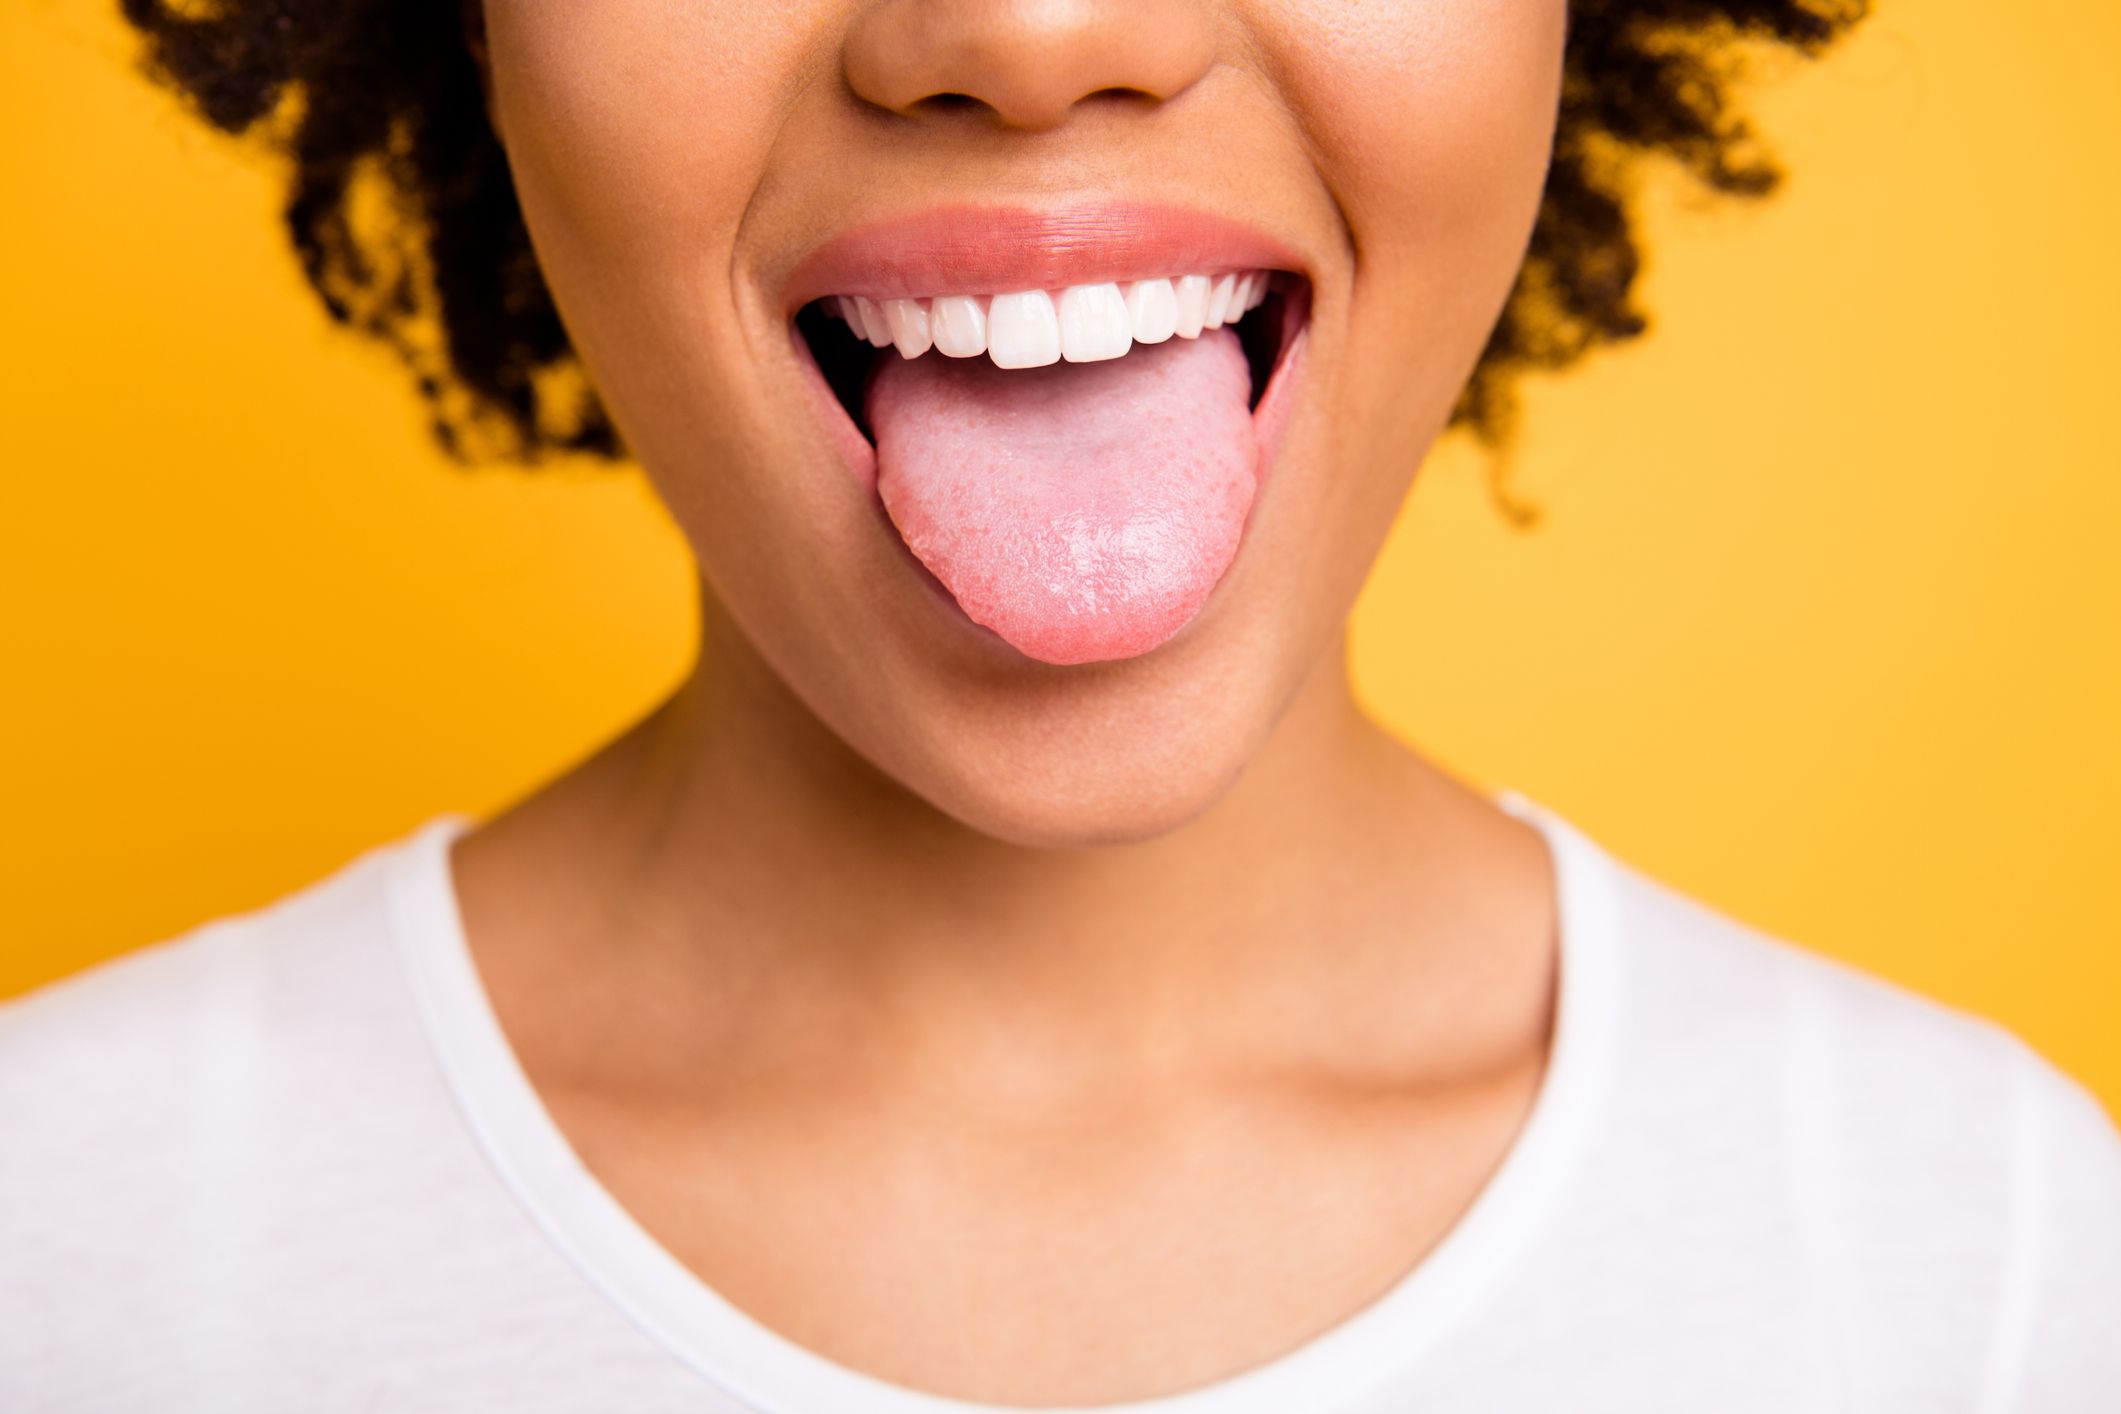 11 Swollen Tongue Causes